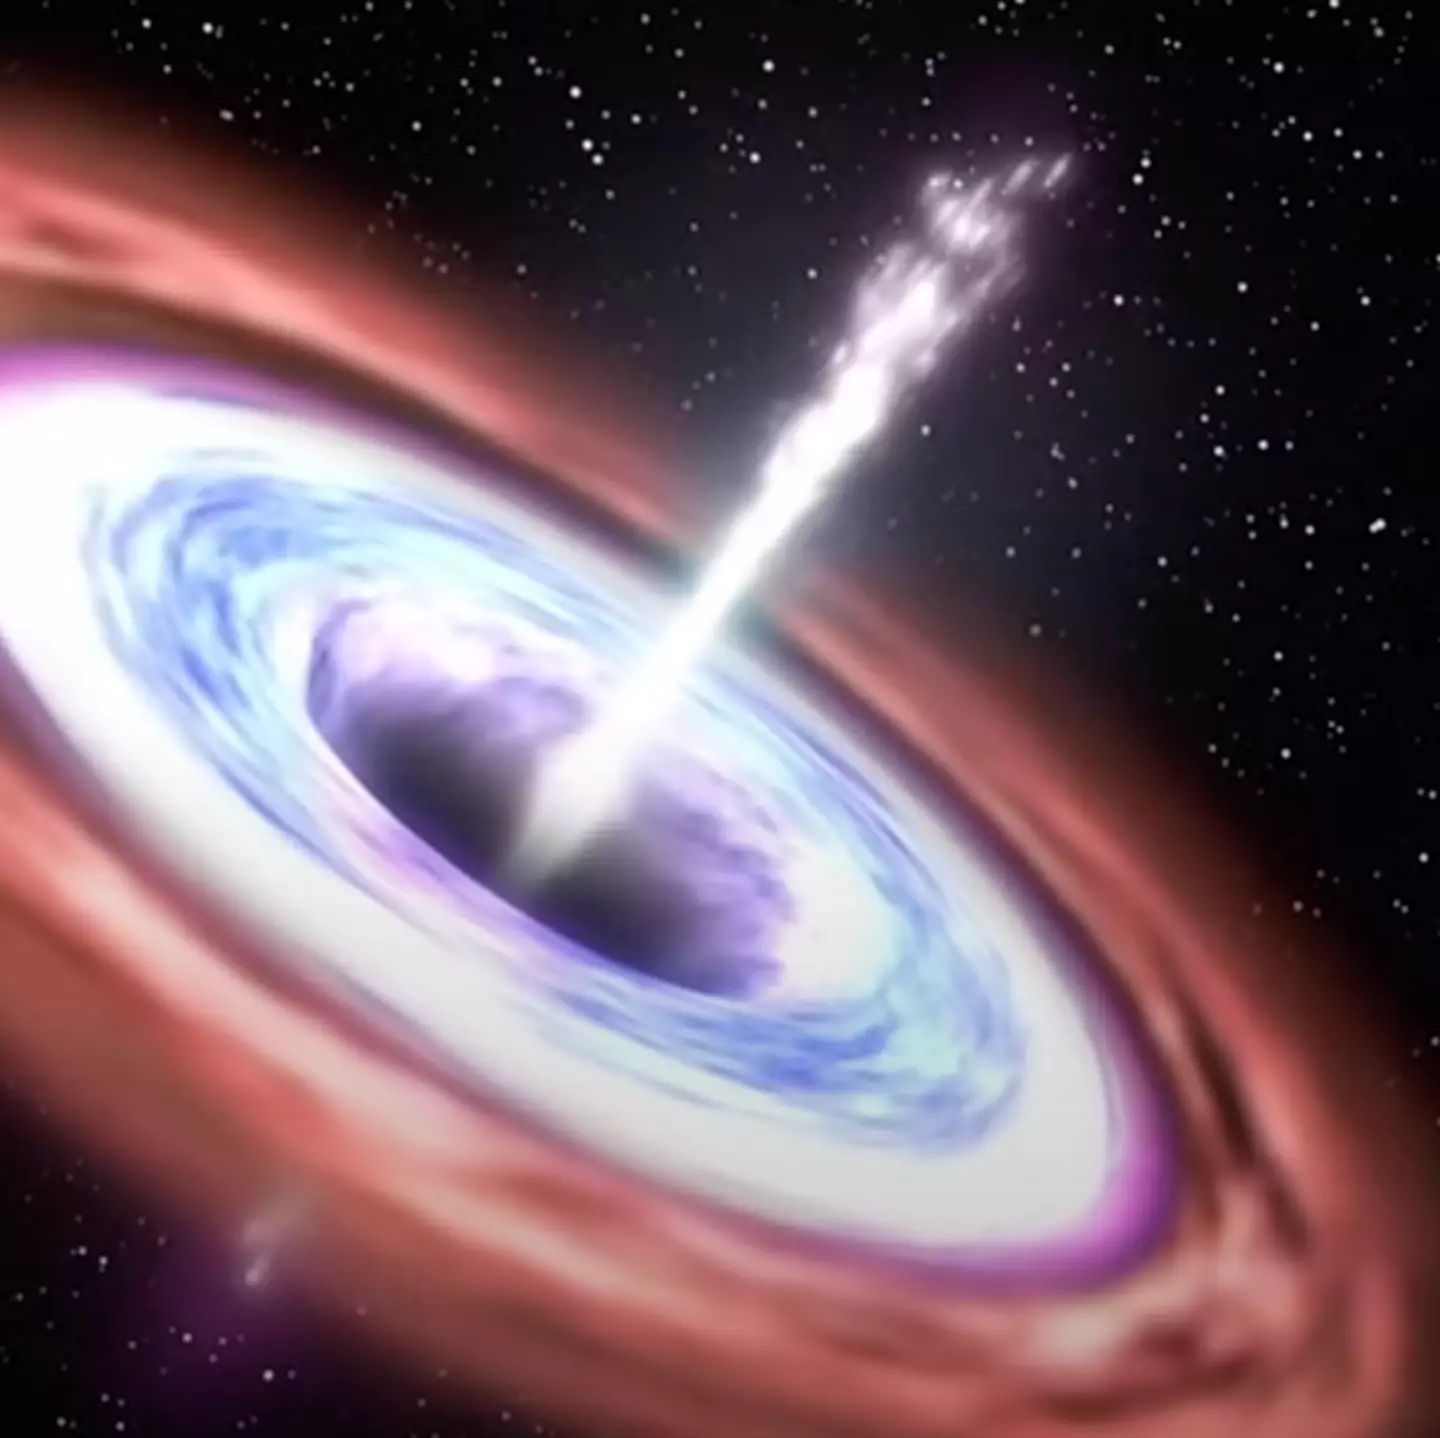 Astronomers believe they have witnessed the birth of a black hole